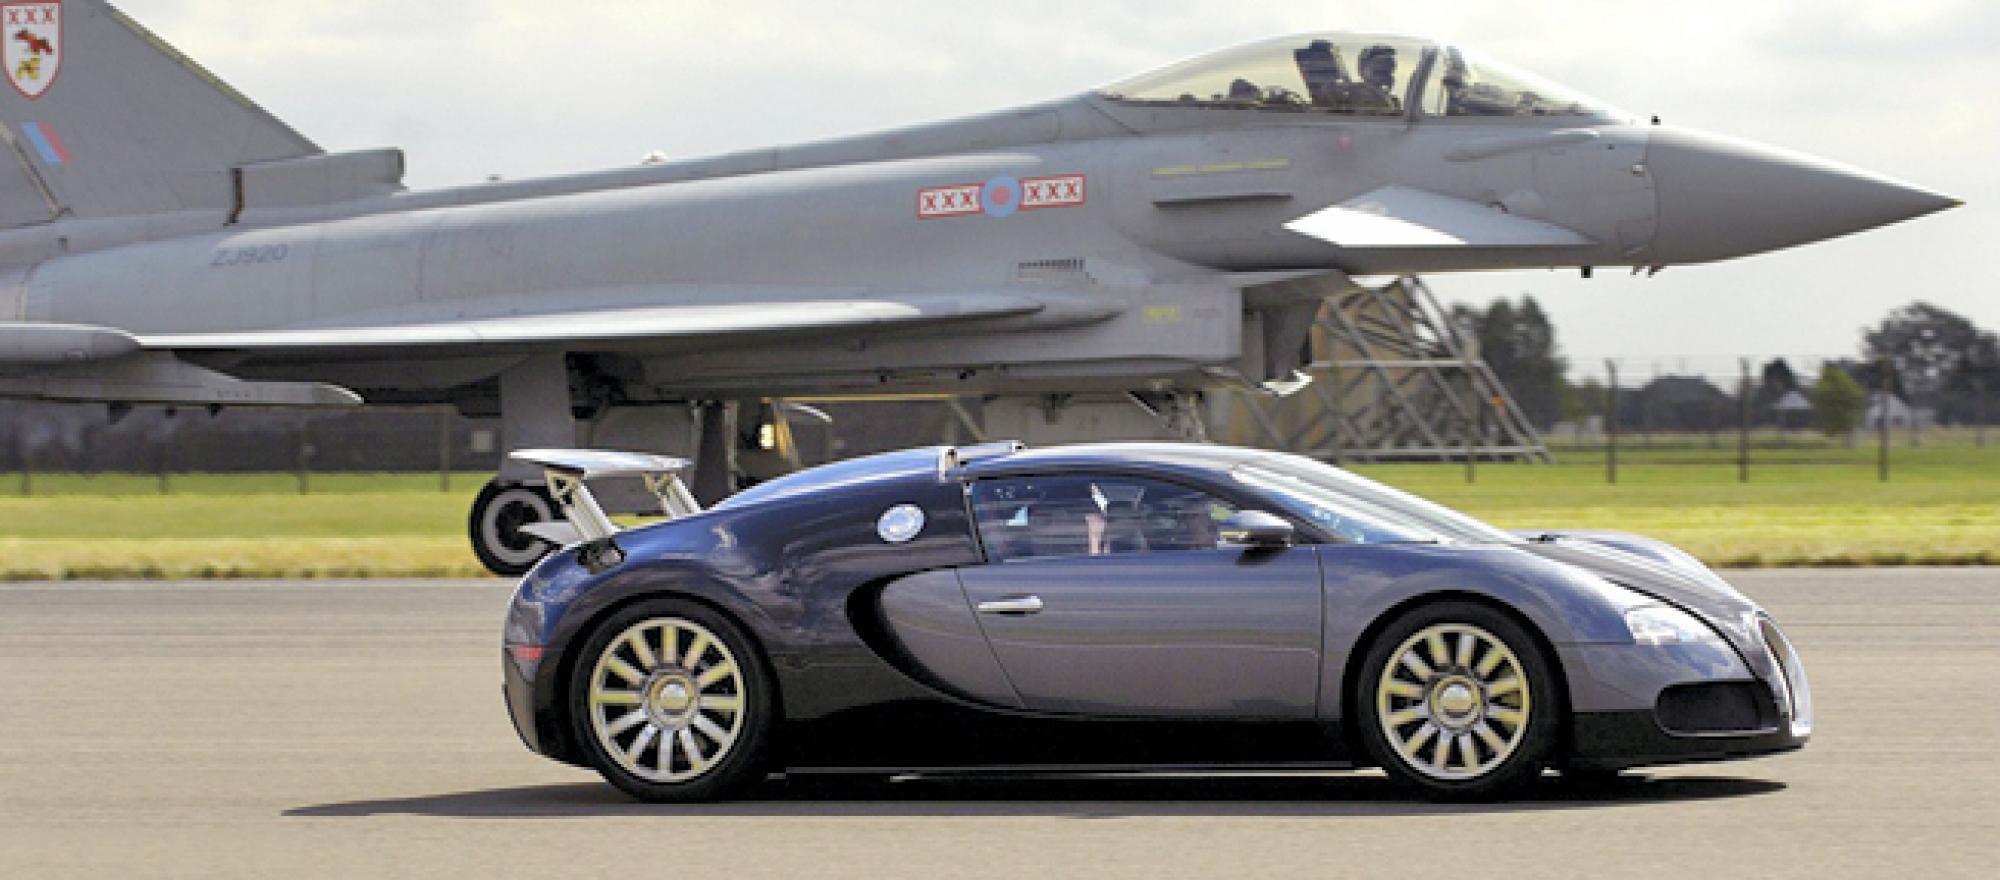 The Eurofighter Typhoon and the Bugatti Veyron at the start of the “ultimate”